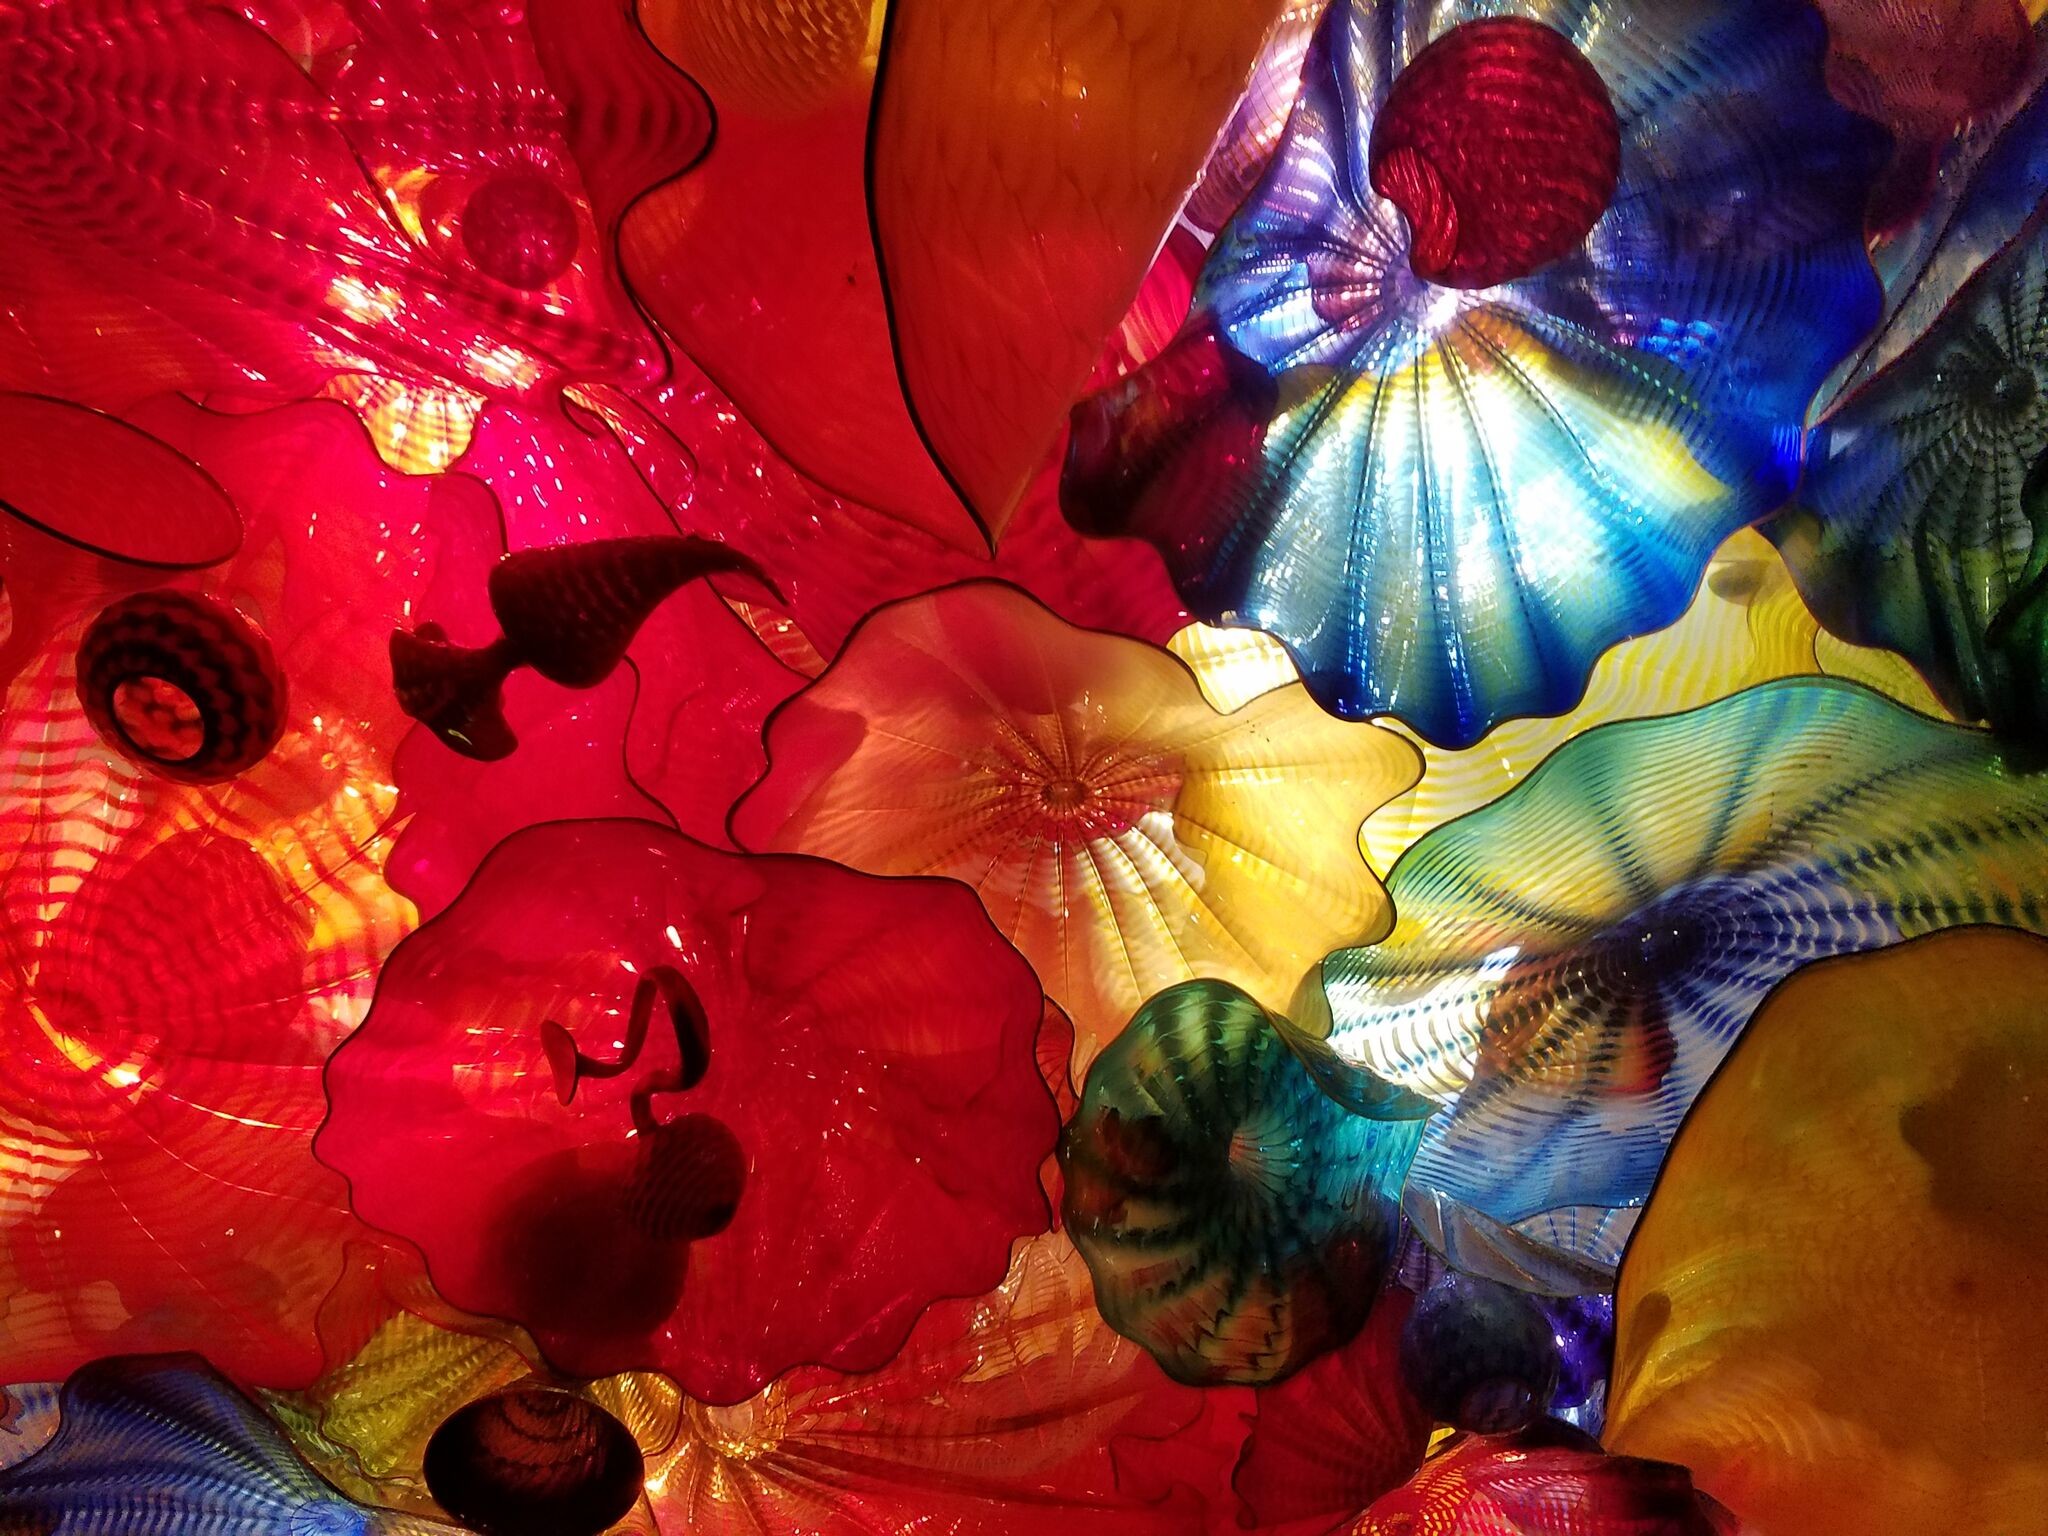 2048x1536 Dale Chihuly (born 1941) is what is called a glass sculptor. His life has  been as colorful as his art, in various ways. Born and raised in the  Pacific ...